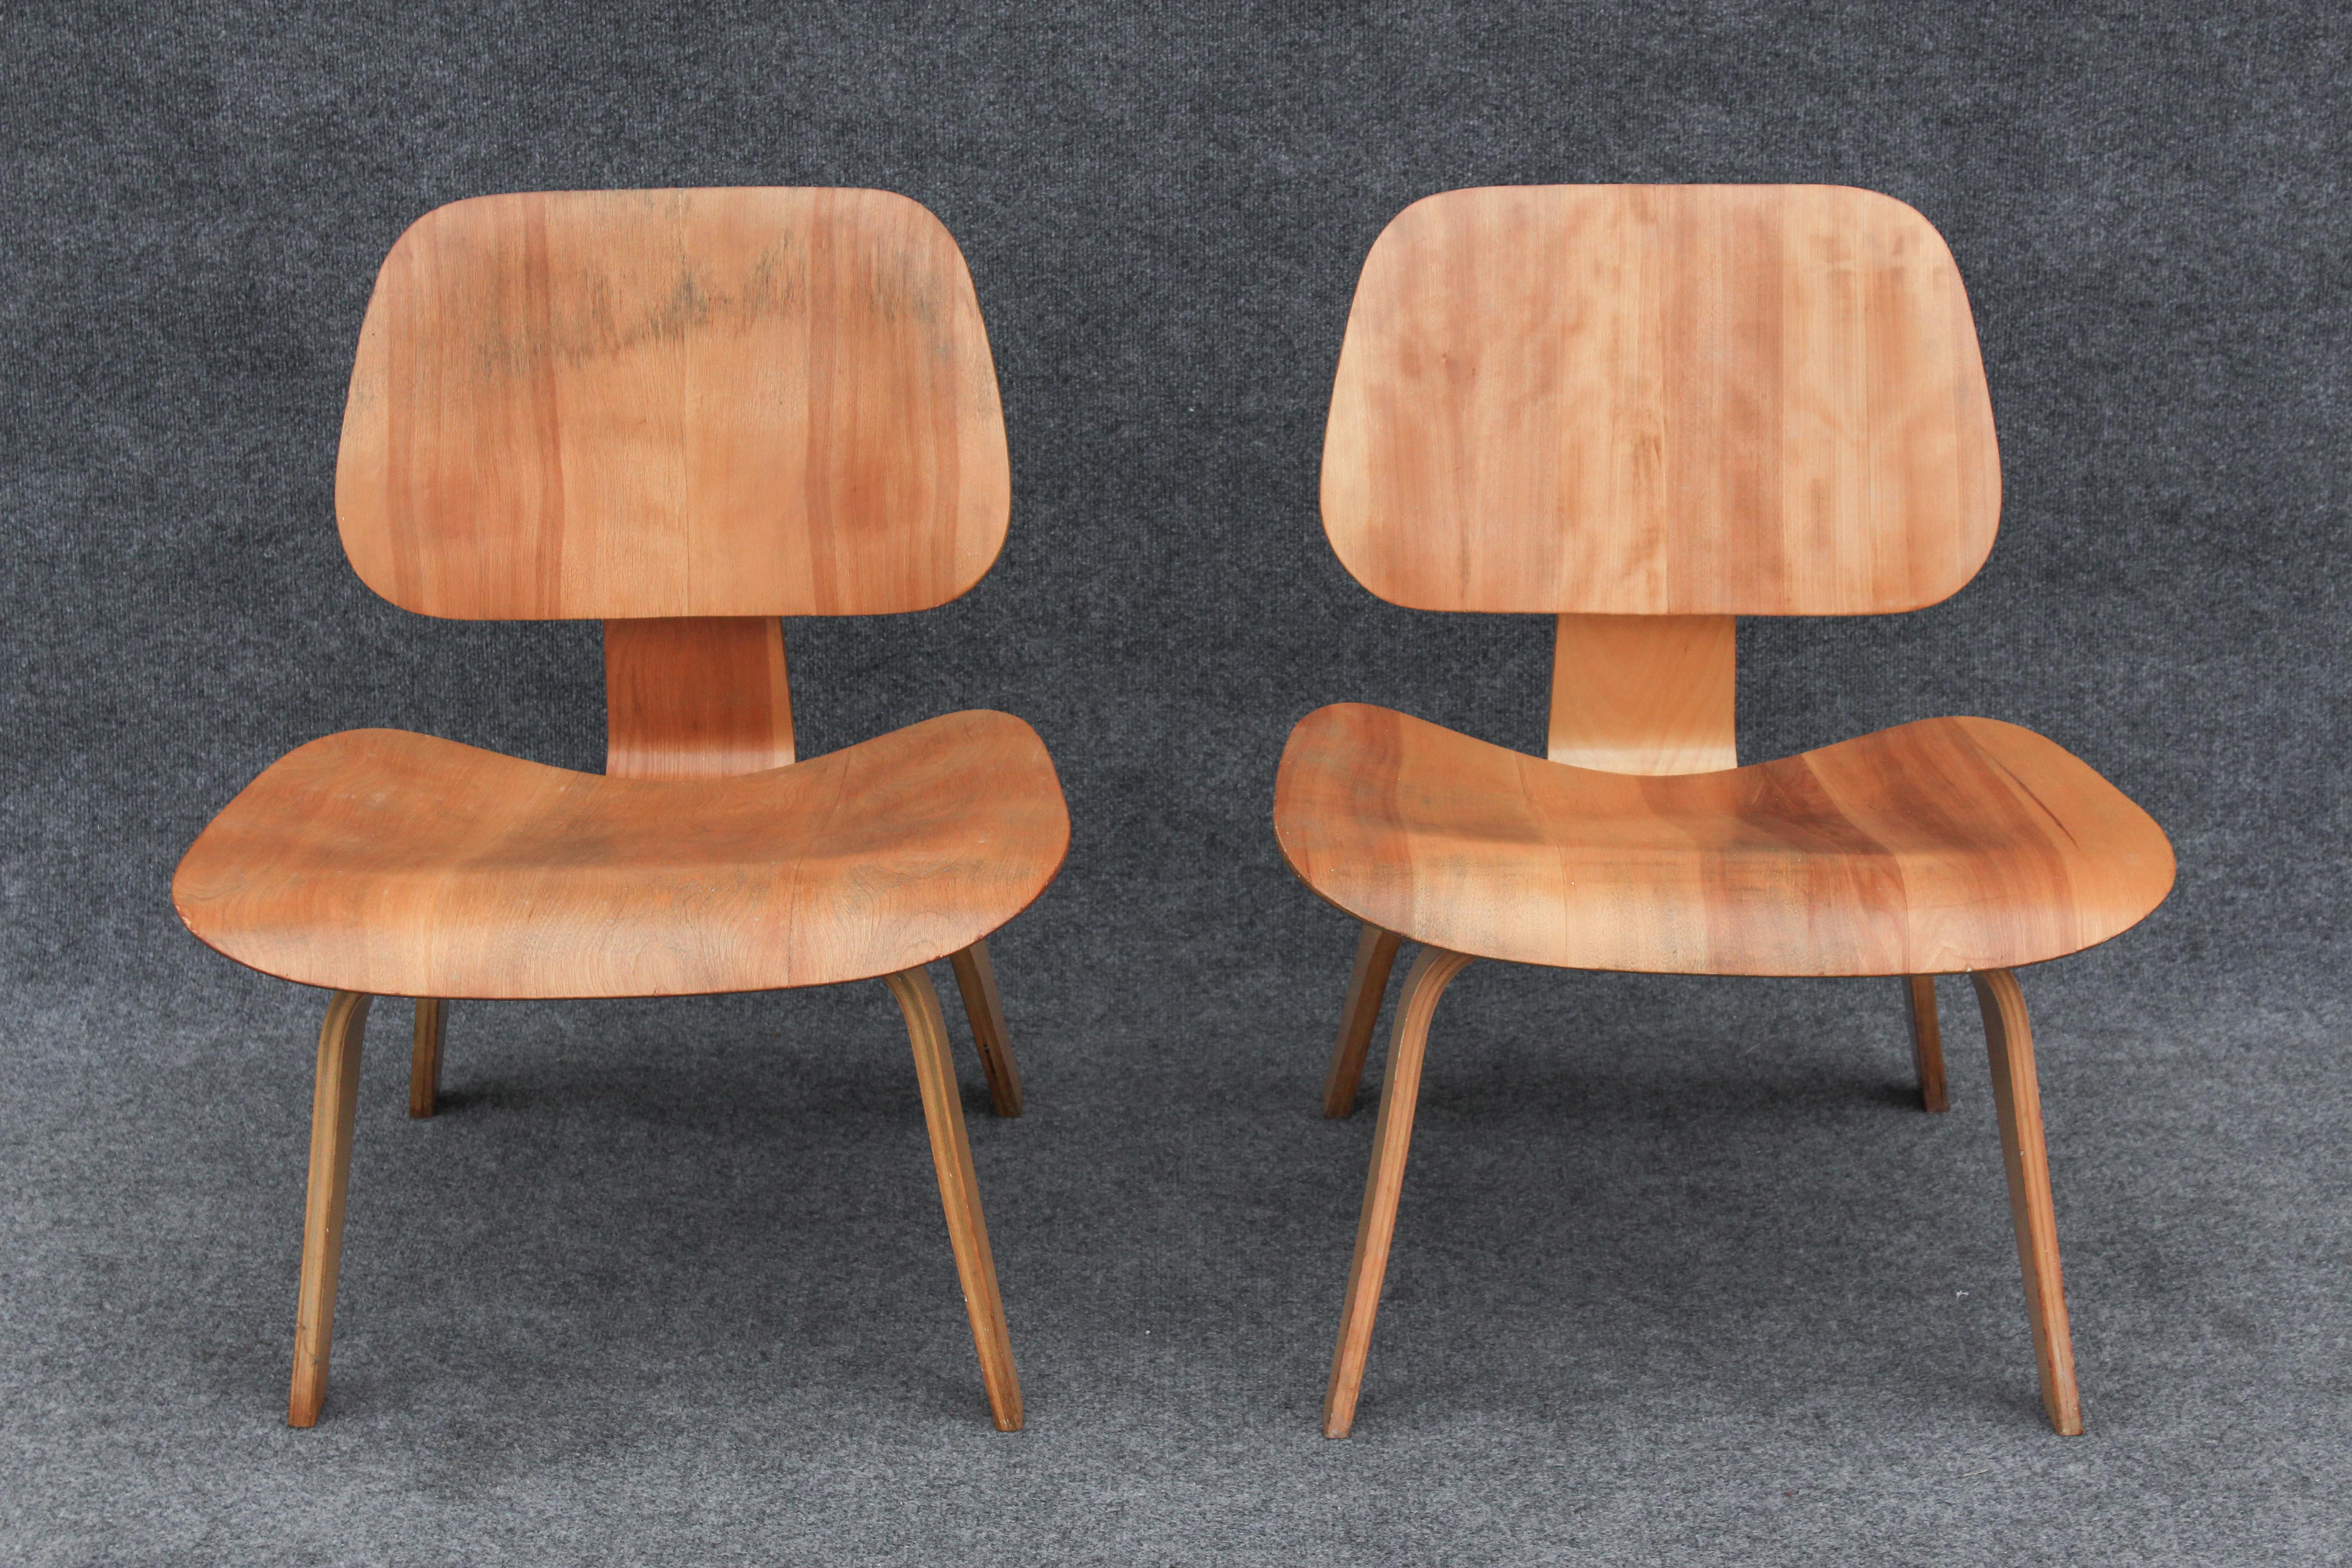 Designed in the late 1940s by Charles Eames, this chair has cemented itself in Mid-Century Design like very few other pieces. Early models like this are difficult to come by and are very rarely in such good condition, as many have been worked on in